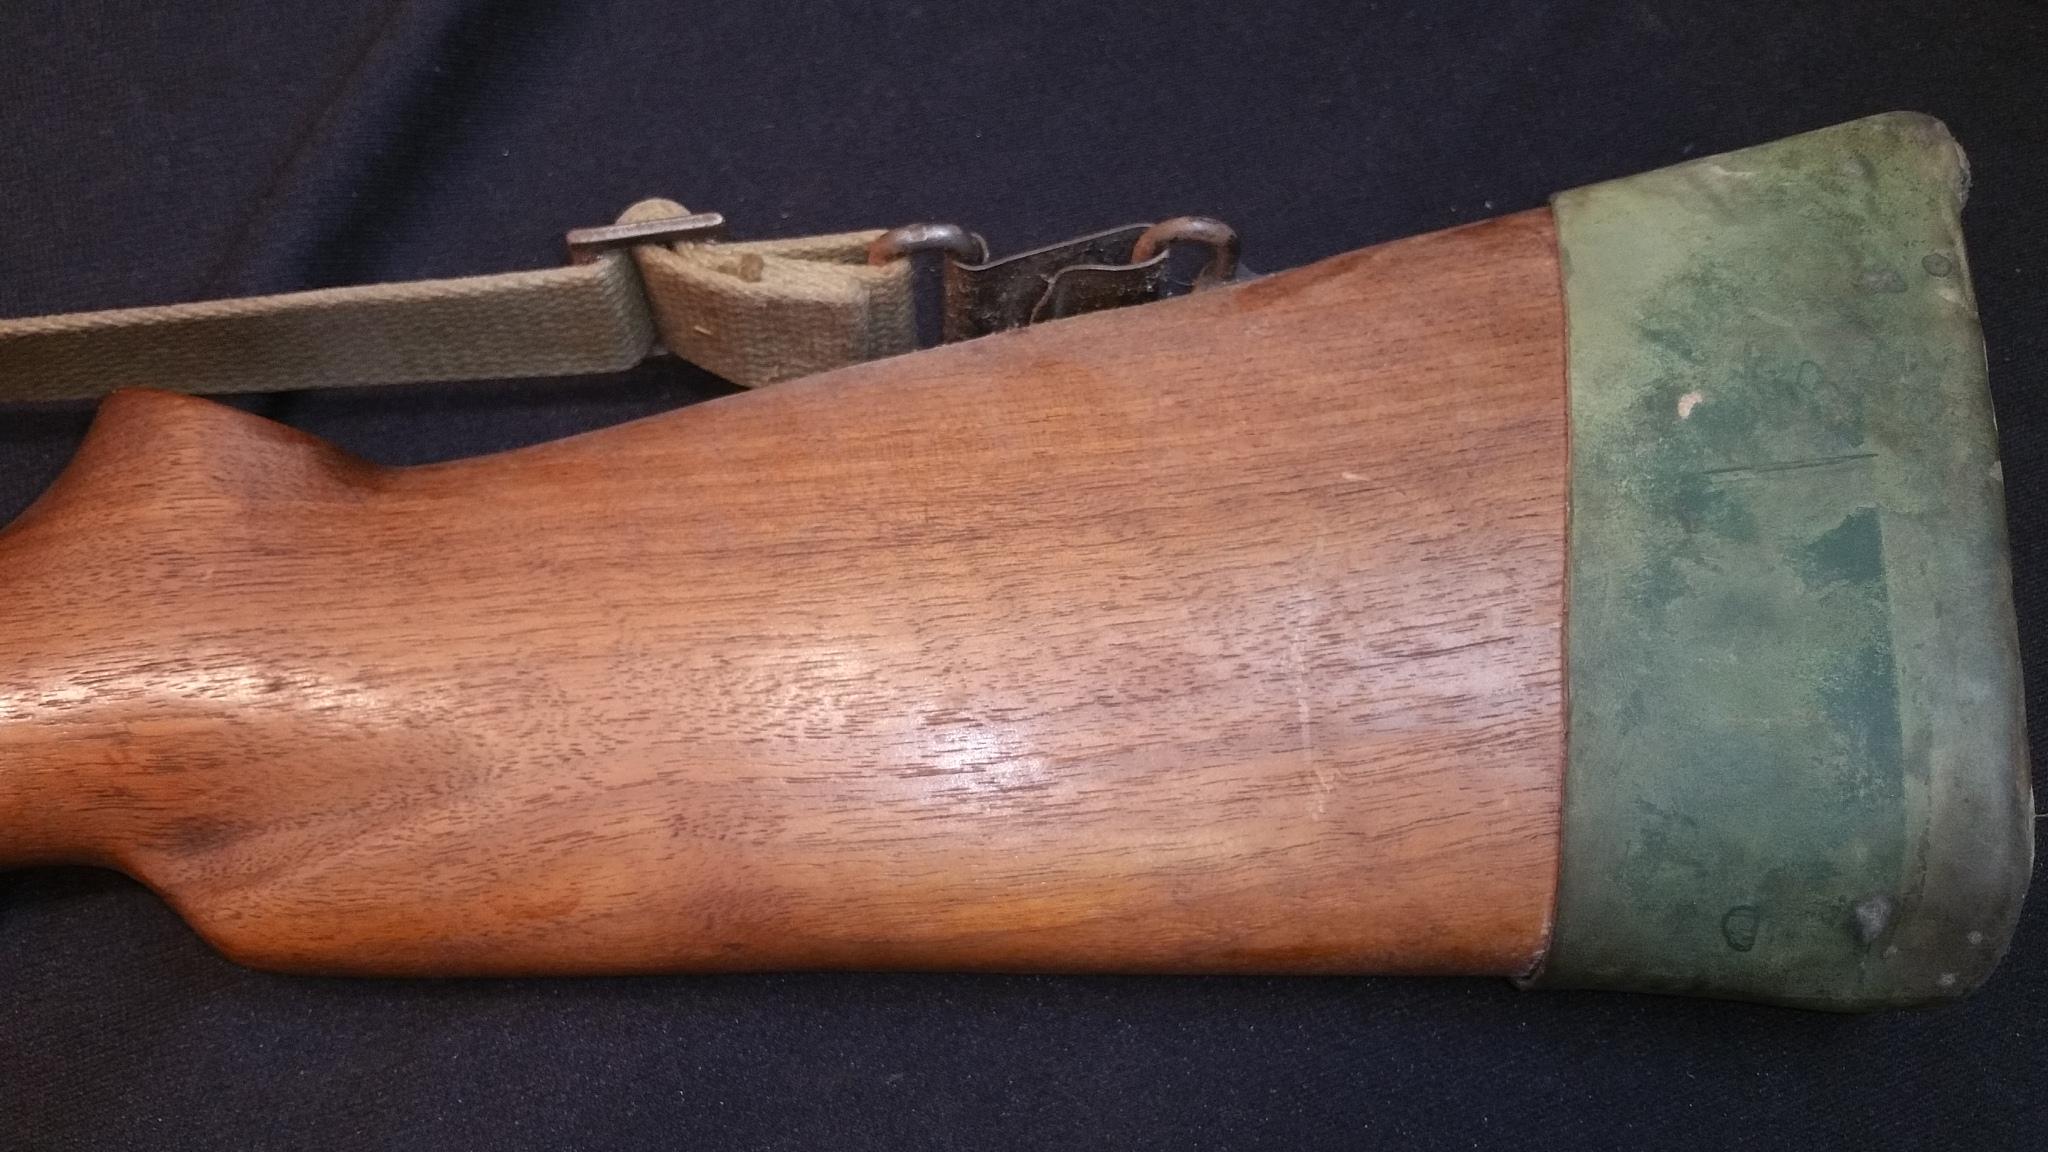 Winchester Model 97 pump action shotgun 12-gauge S/N: 952577 Stamped U.S. with sling and butt cover